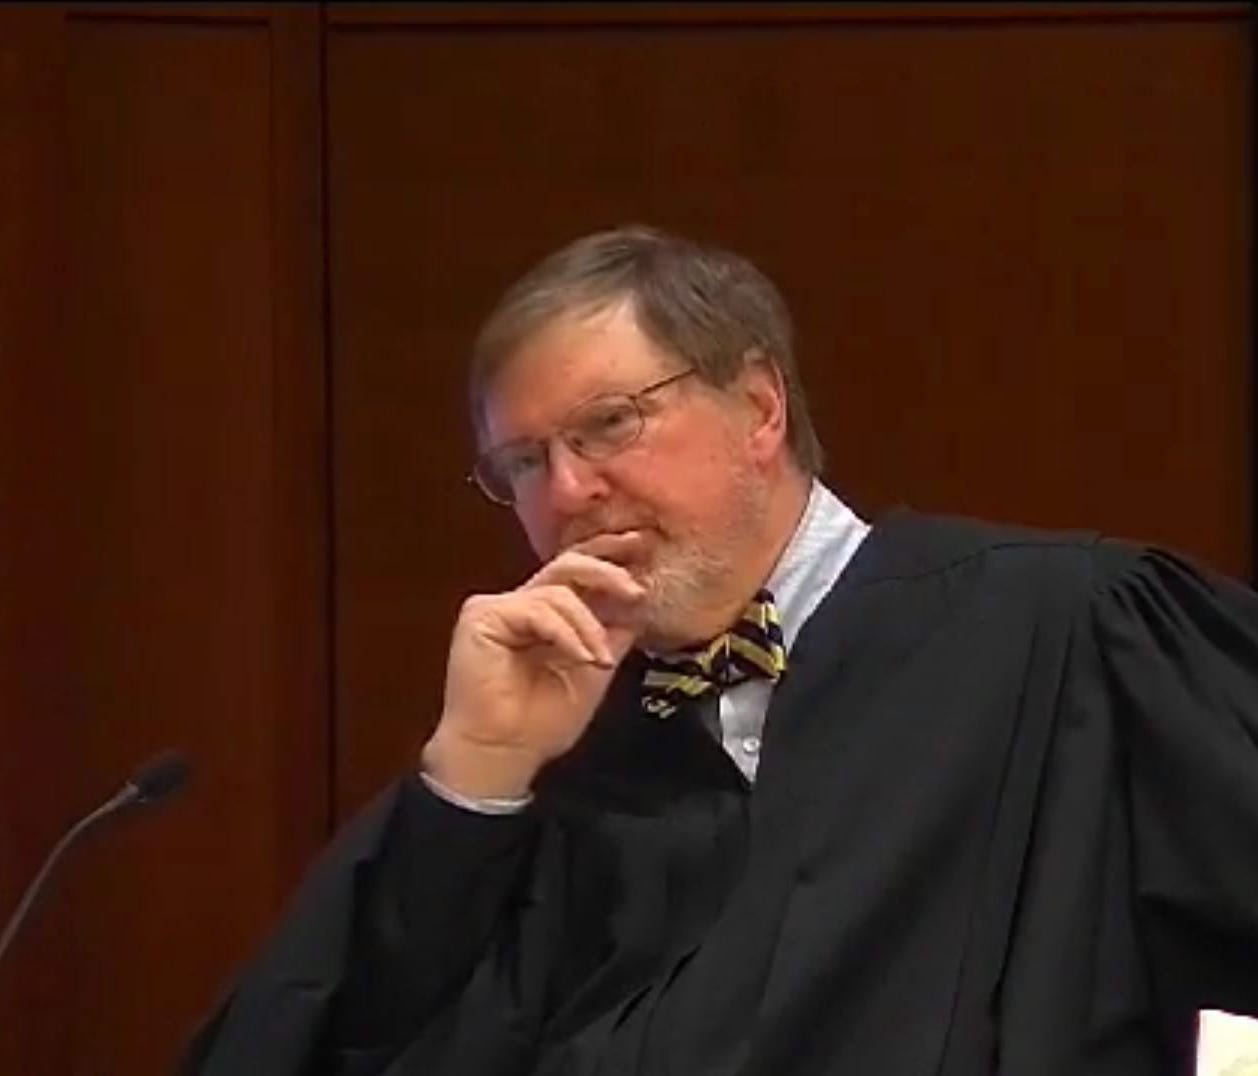 A frame grab taken from a video shows U.S. District Judge James Robart during a hearing in Seattle on Feb. 3, 2017, debating President Trump's travel ban targeting seven majority Muslim countries. Robart blocked Trump's order from being implemented, 